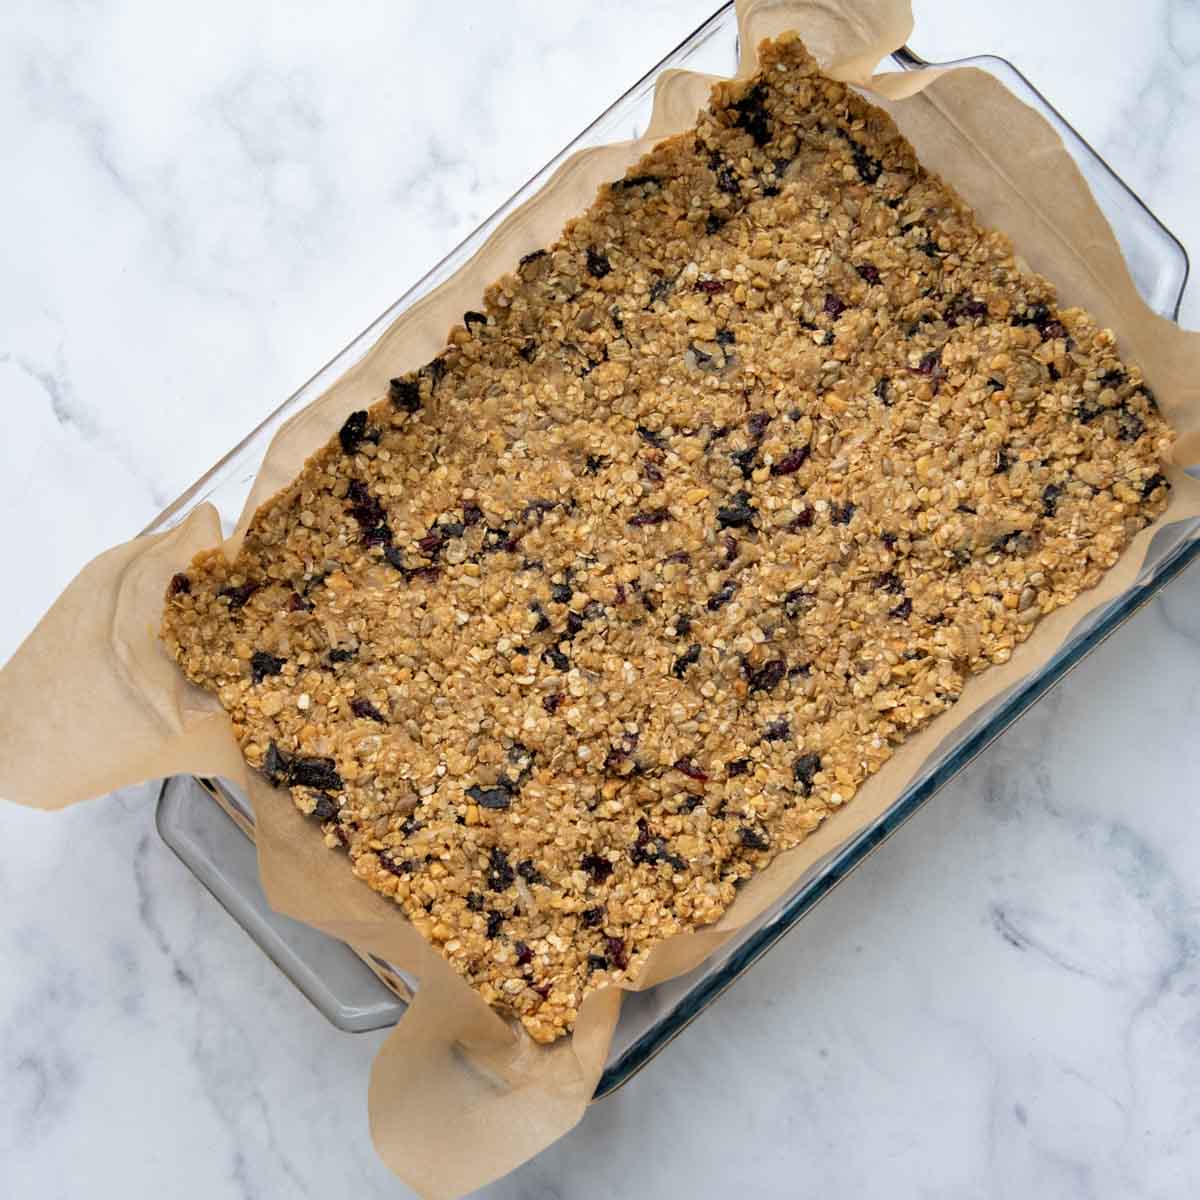 unbaked bars in a baking dish.